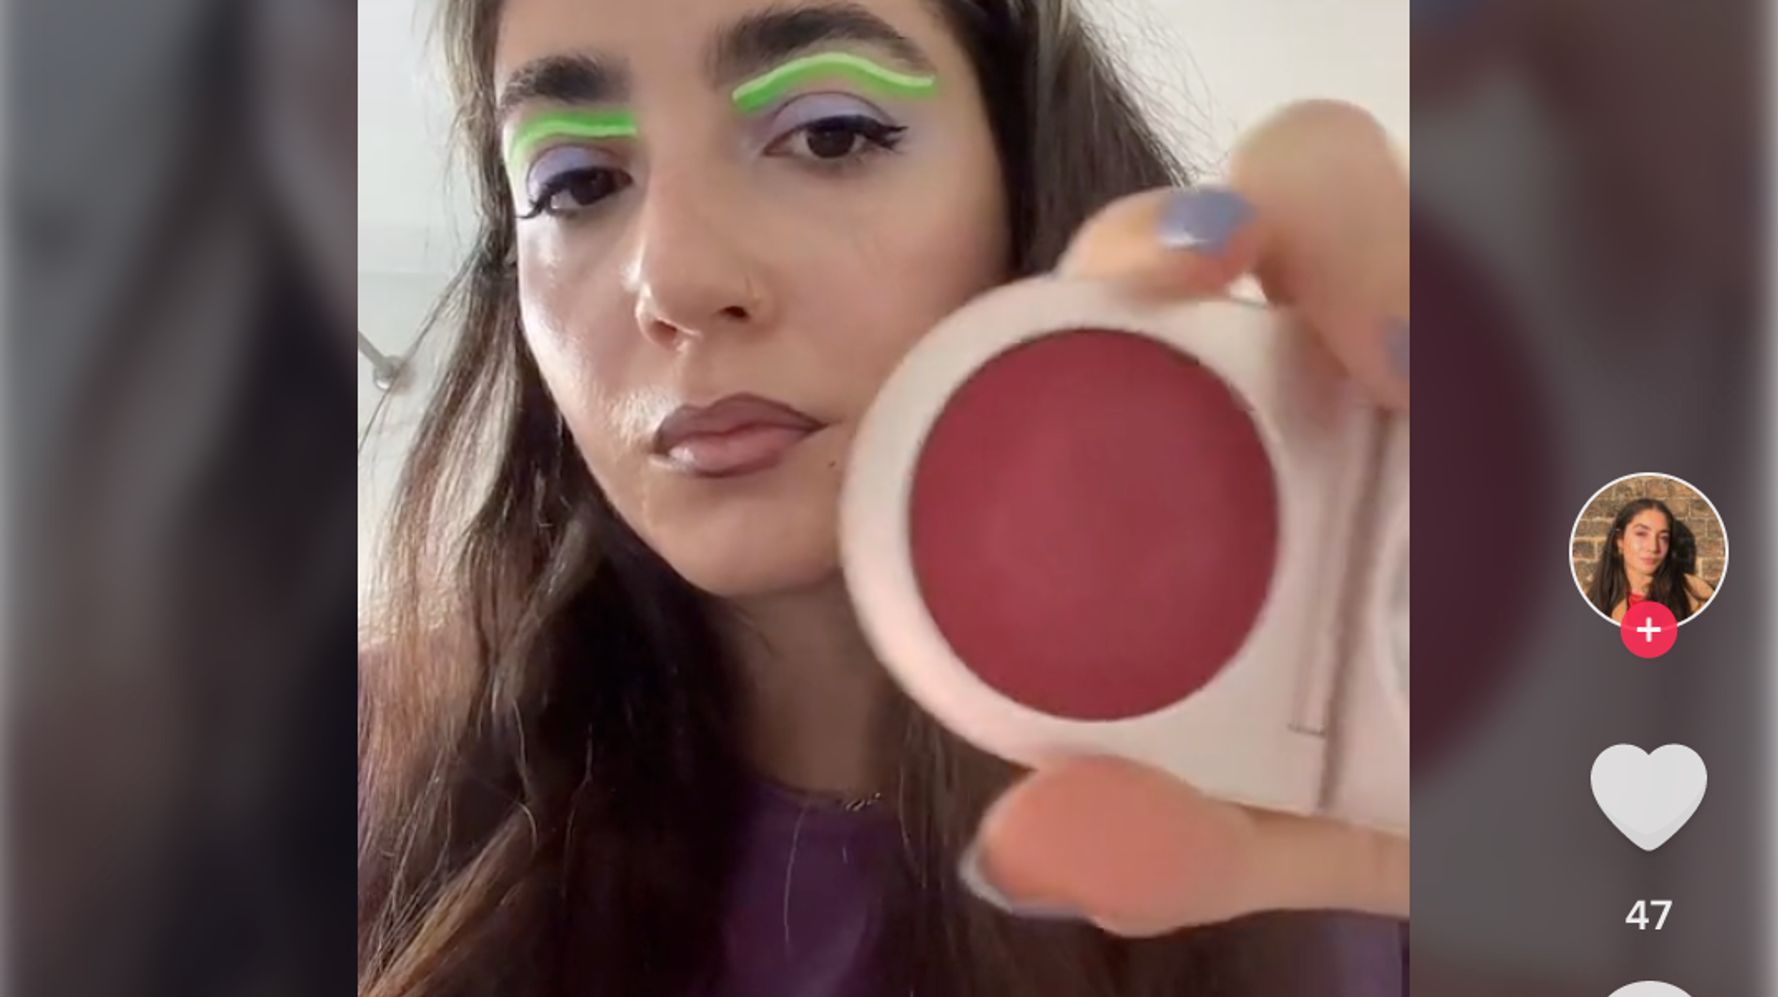 We Tried 9 TikTok Makeup And Beauty Hacks To See If They Work